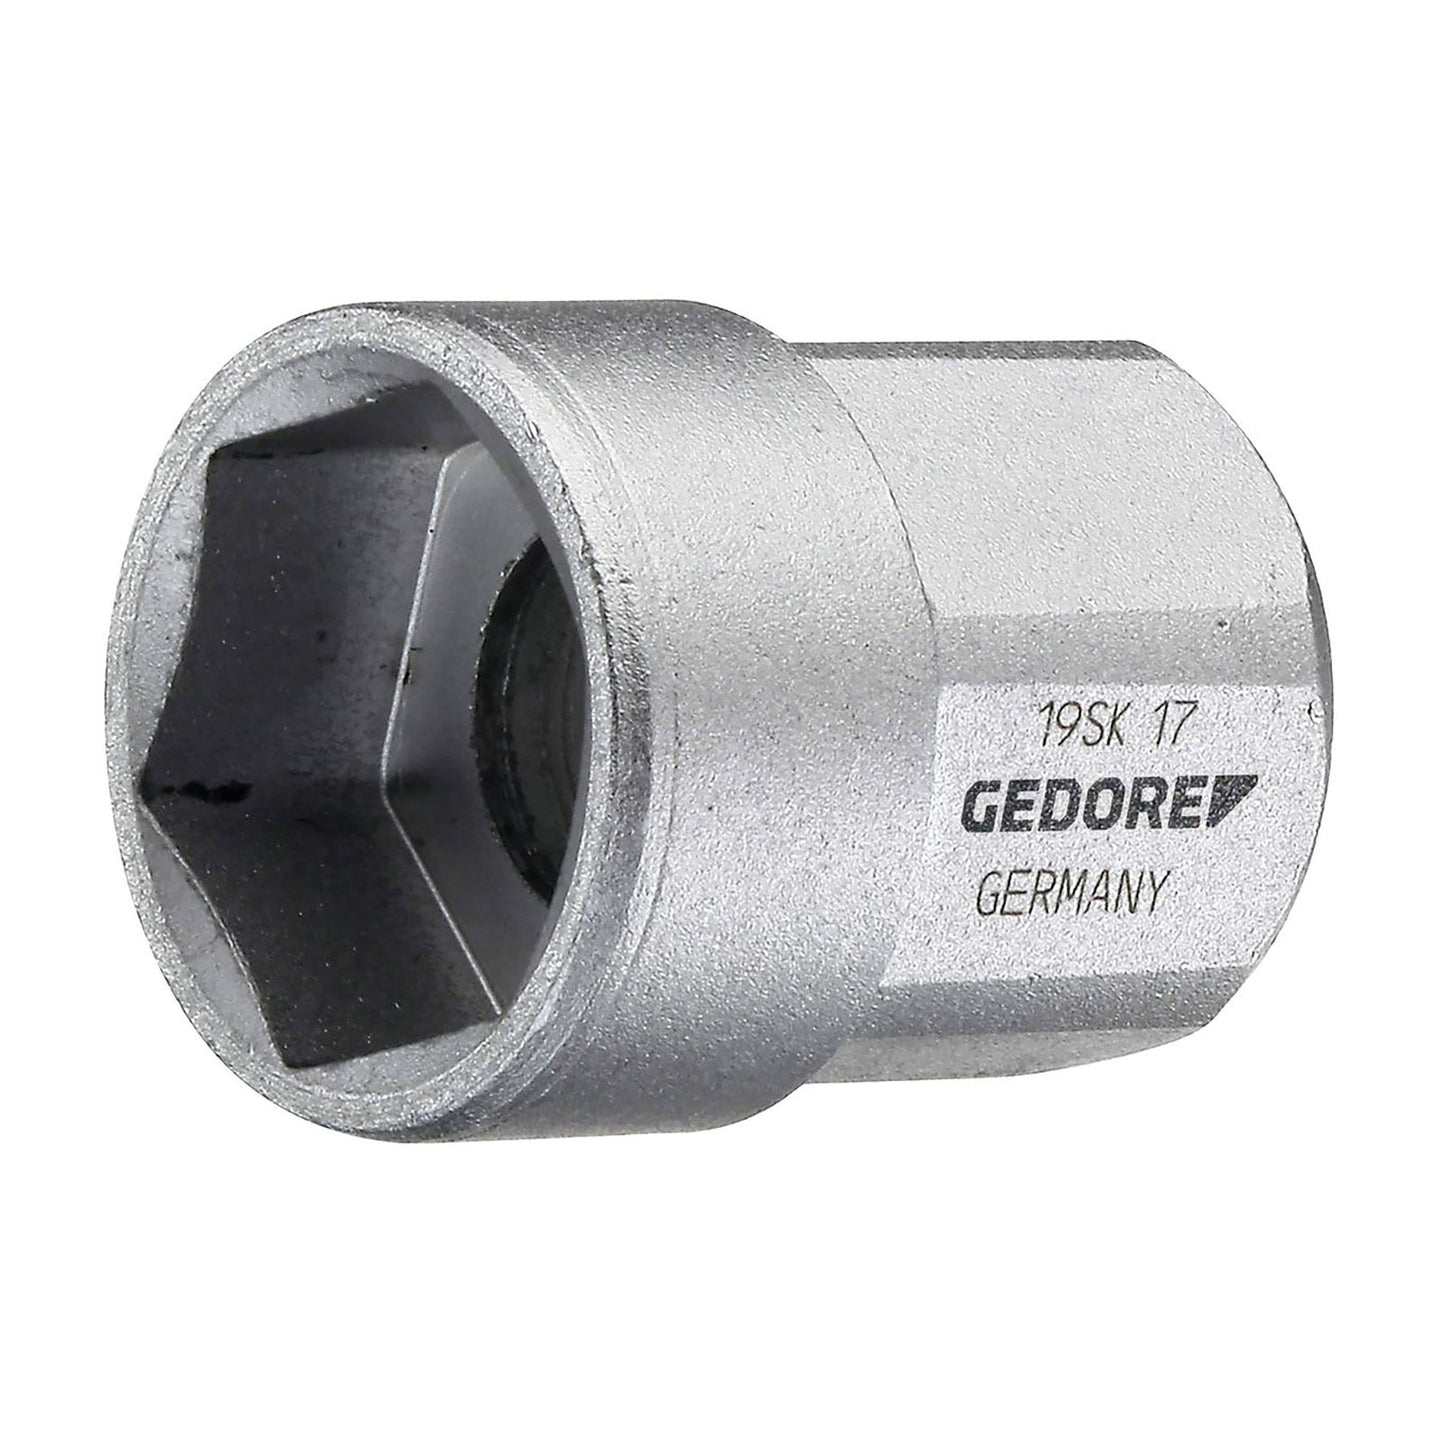 GEDORE 19 SK 19 - Special Hex socket 1/2", 19mm (2225948)